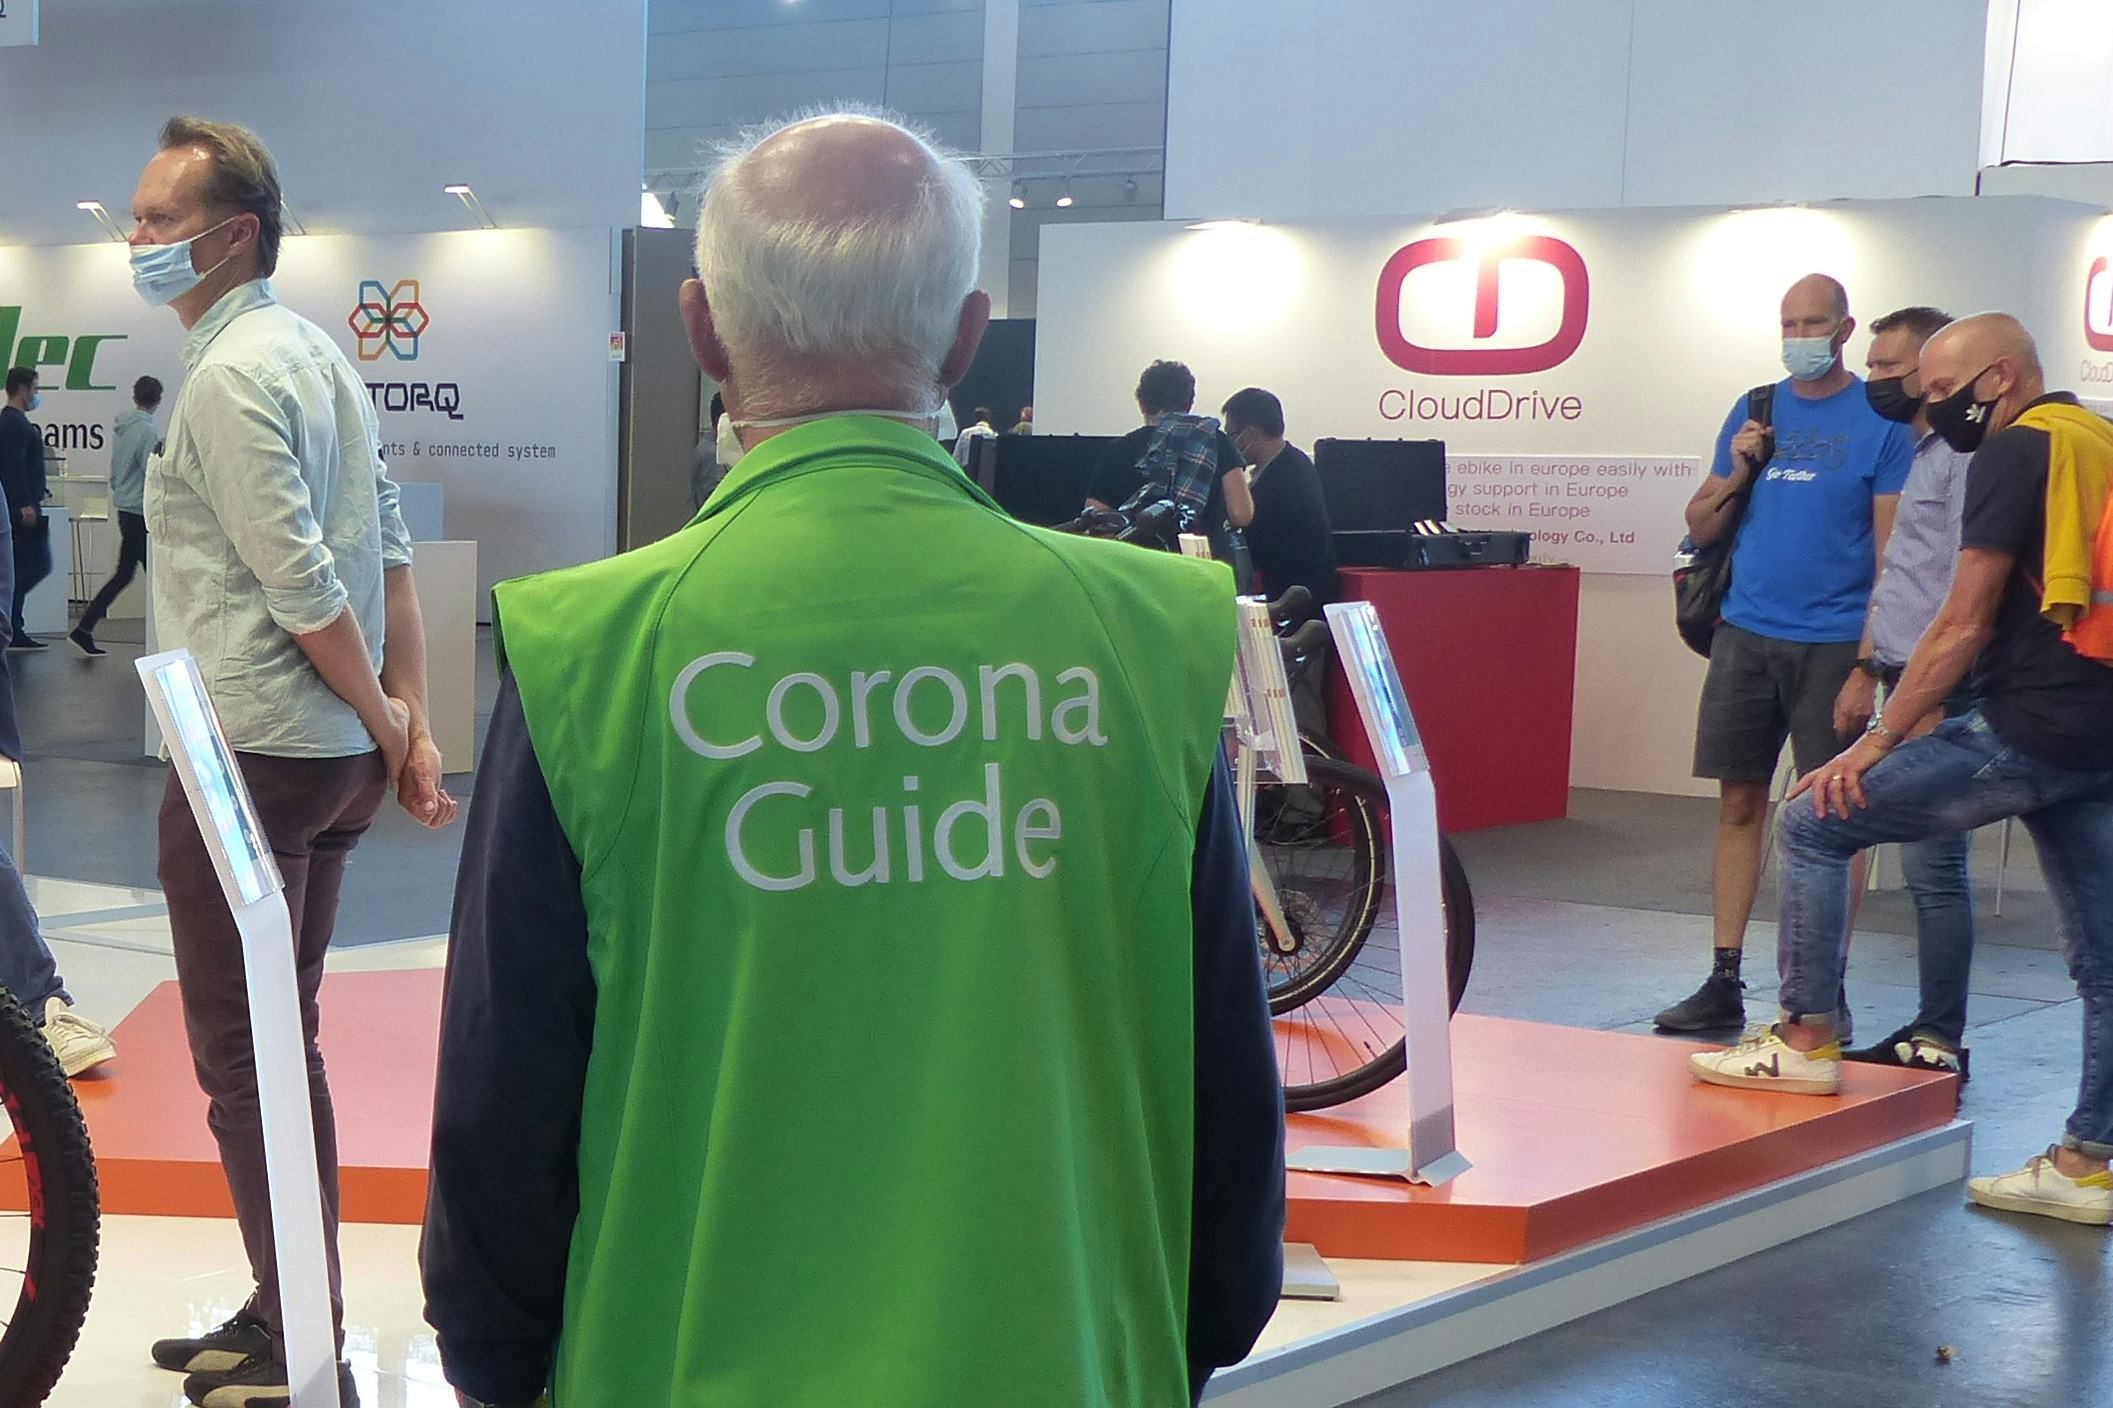 Stringent corona measures were implemented by Messe Friedrichshafen to make for Eurobike to take place this week. – Photo Bike Europe